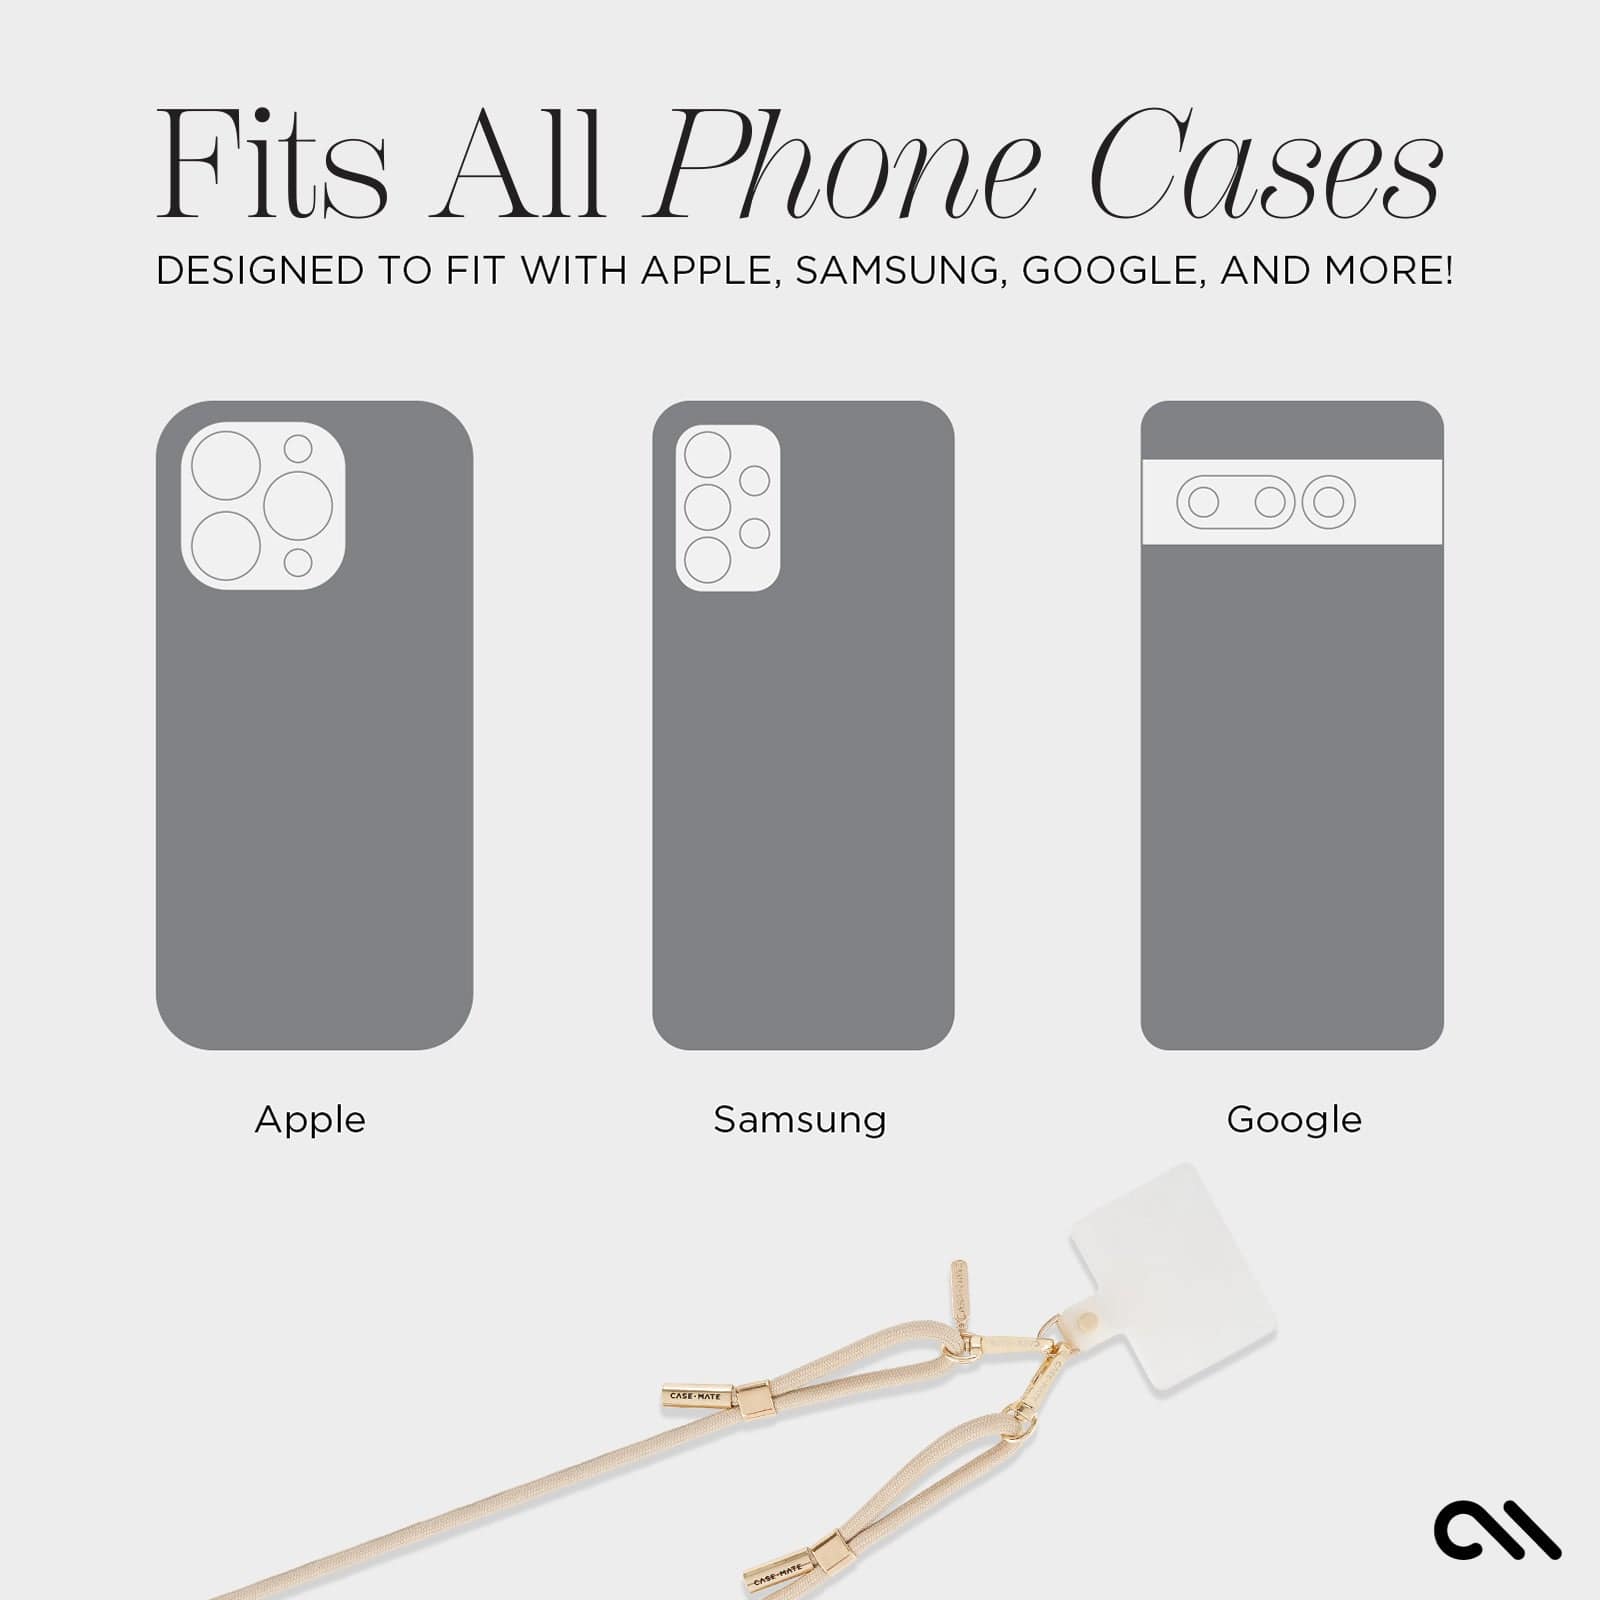 FITS ALL PHONE CASES DESIGNED TO FIT WITH APPLE, SAMSUNG, GOOGLE AND MORE!